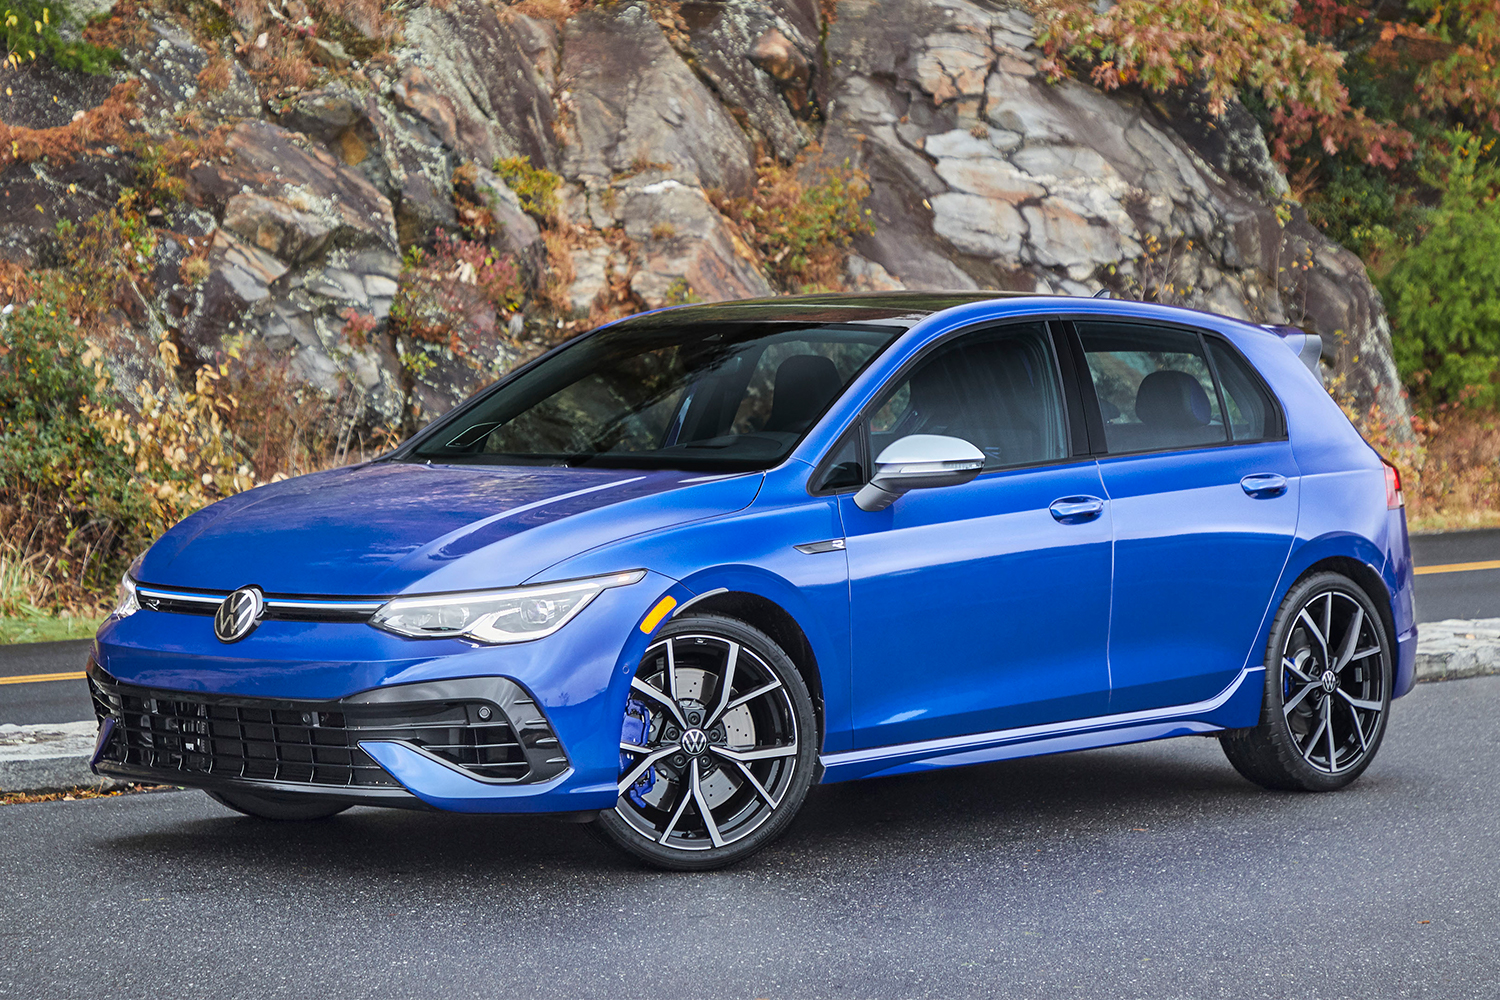 The 2022 Volkswagen Golf R hot hatch in blue. We tested and reviewed the hatchback to see how it compares to older generations.